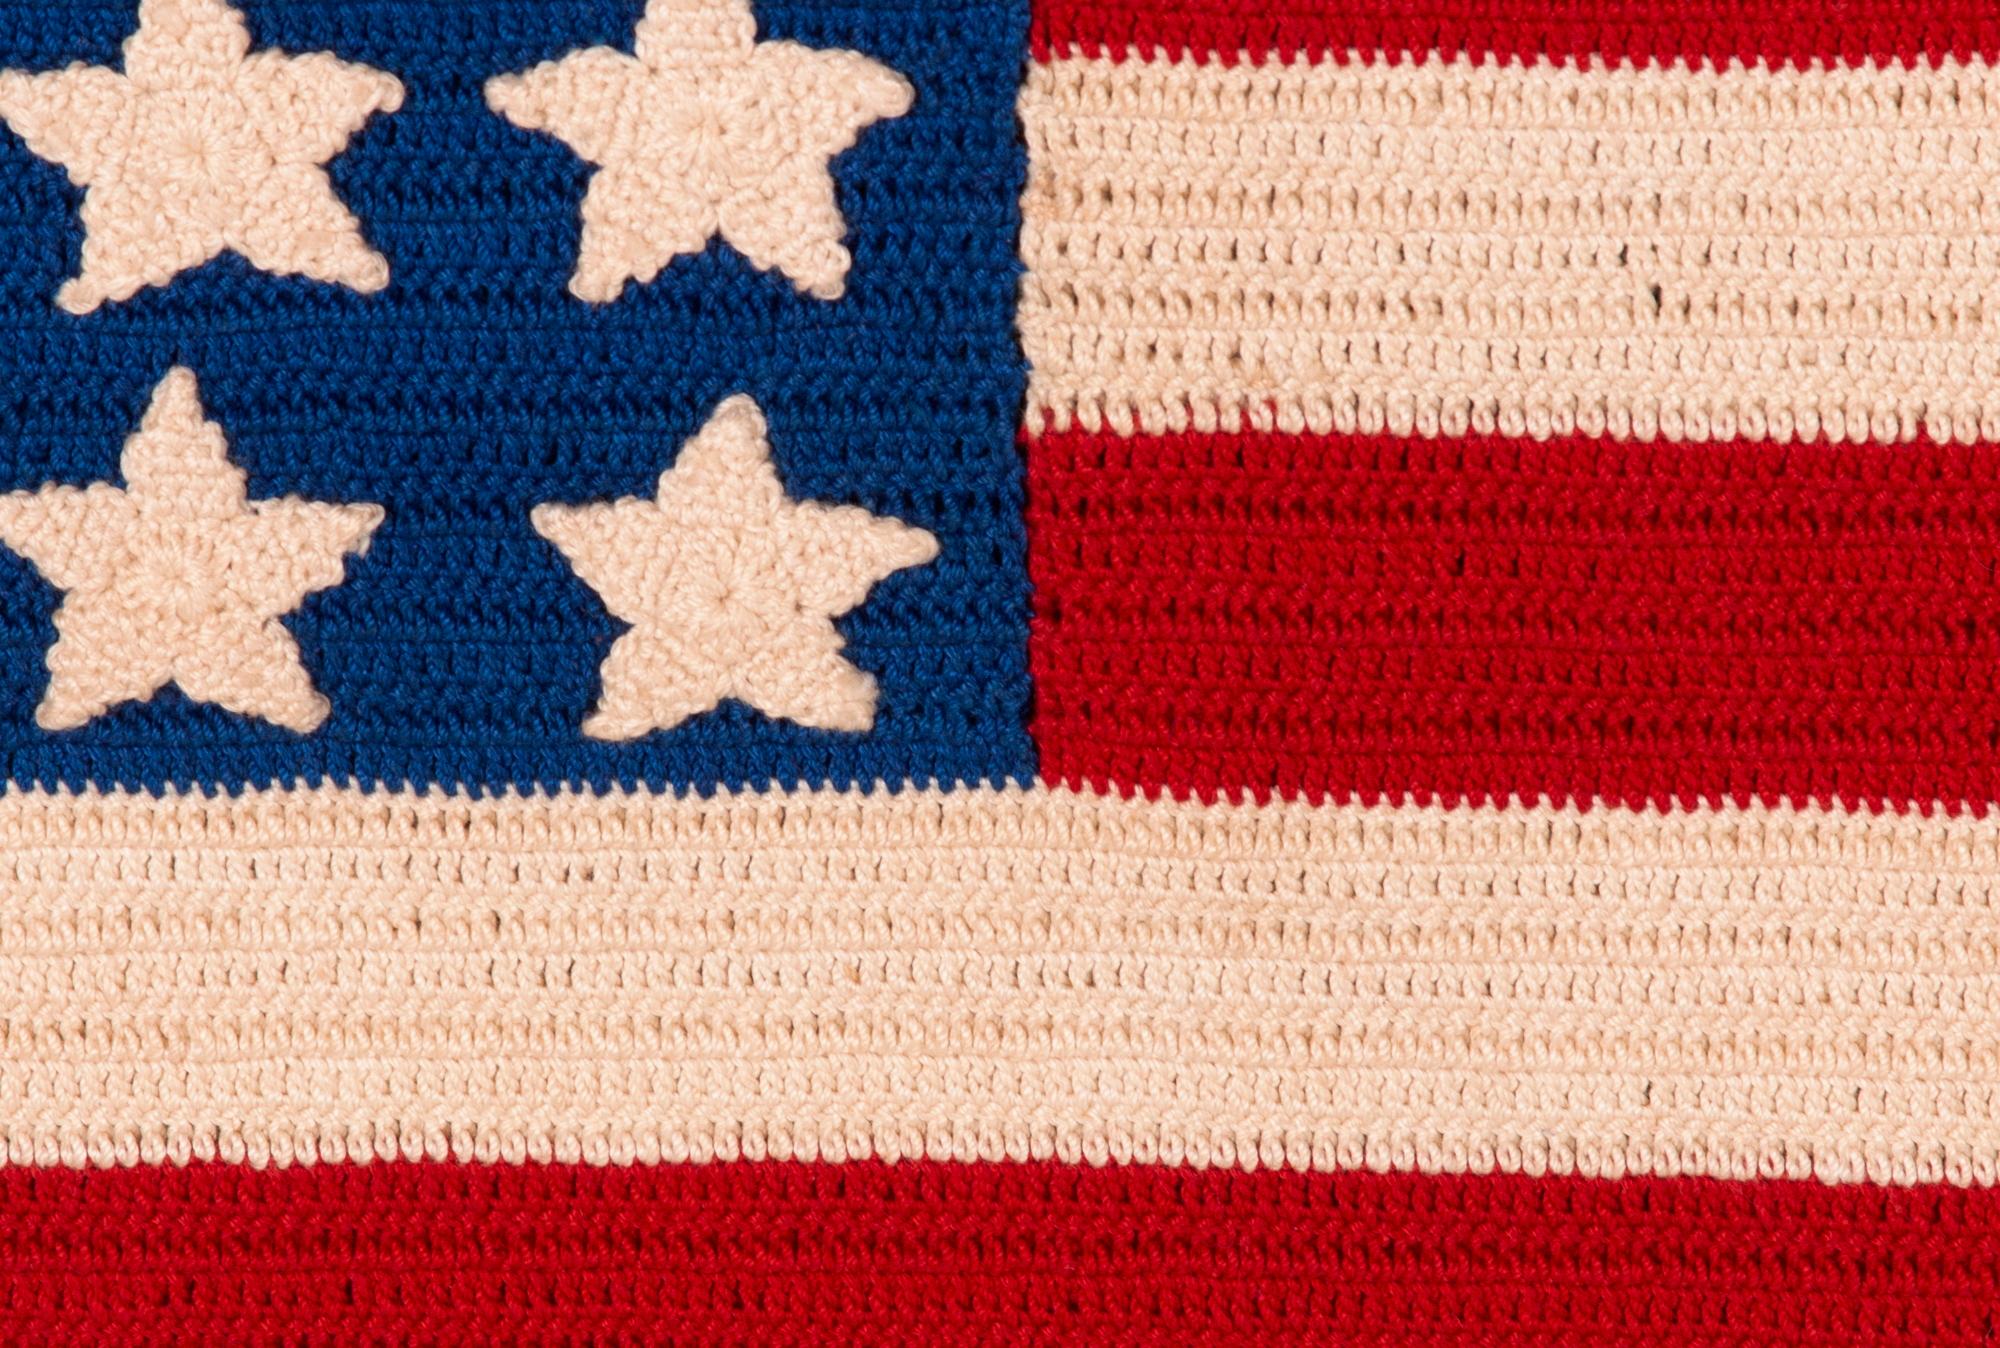 Mid-20th Century 48 Star Crocheted American Flag, With Beautiful Striking Colors, ca 1941-1945